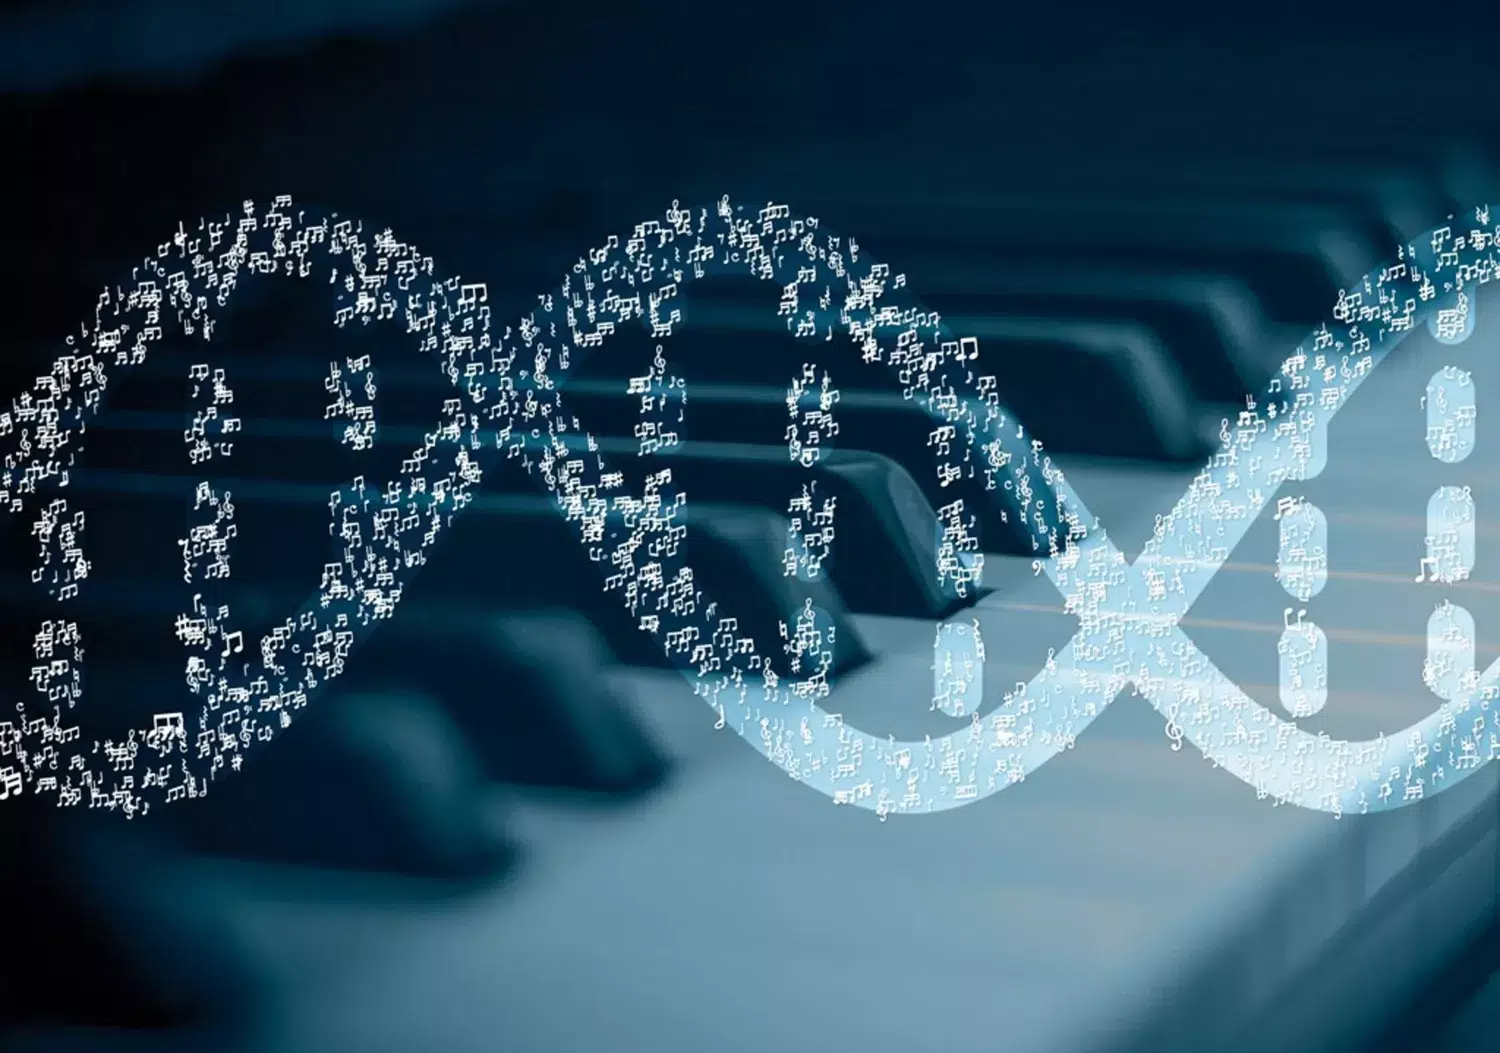 Decorative image representing a musical DNA spiral that is used in presentations of the research group's work on the genetics of music.